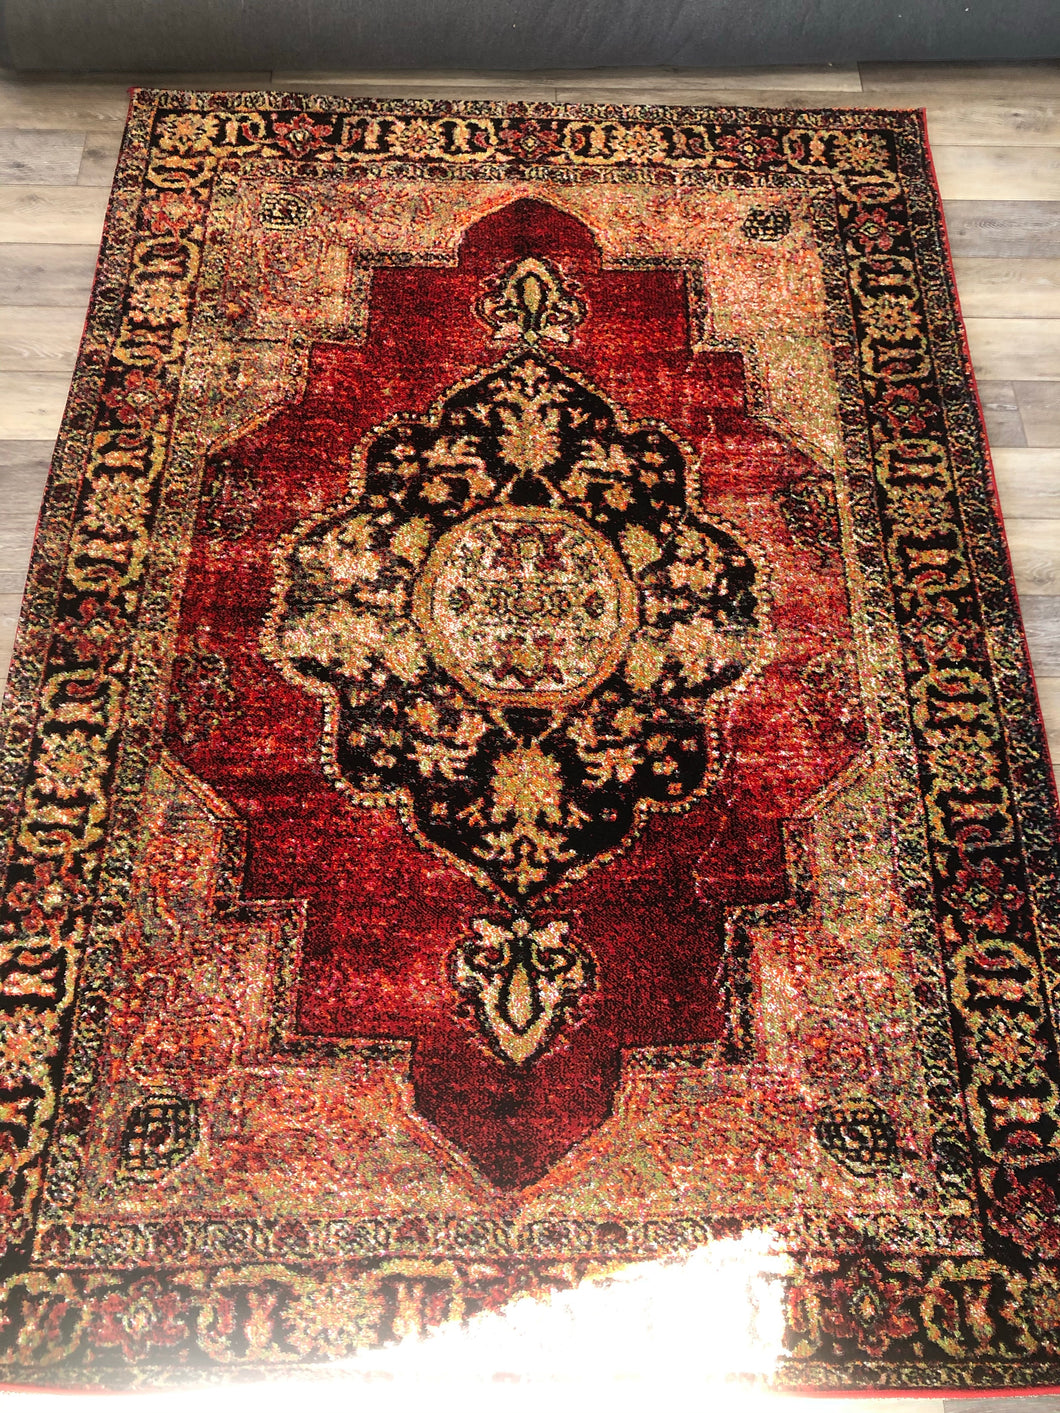 5’3” x 7’6” Red Medallion Area Rug